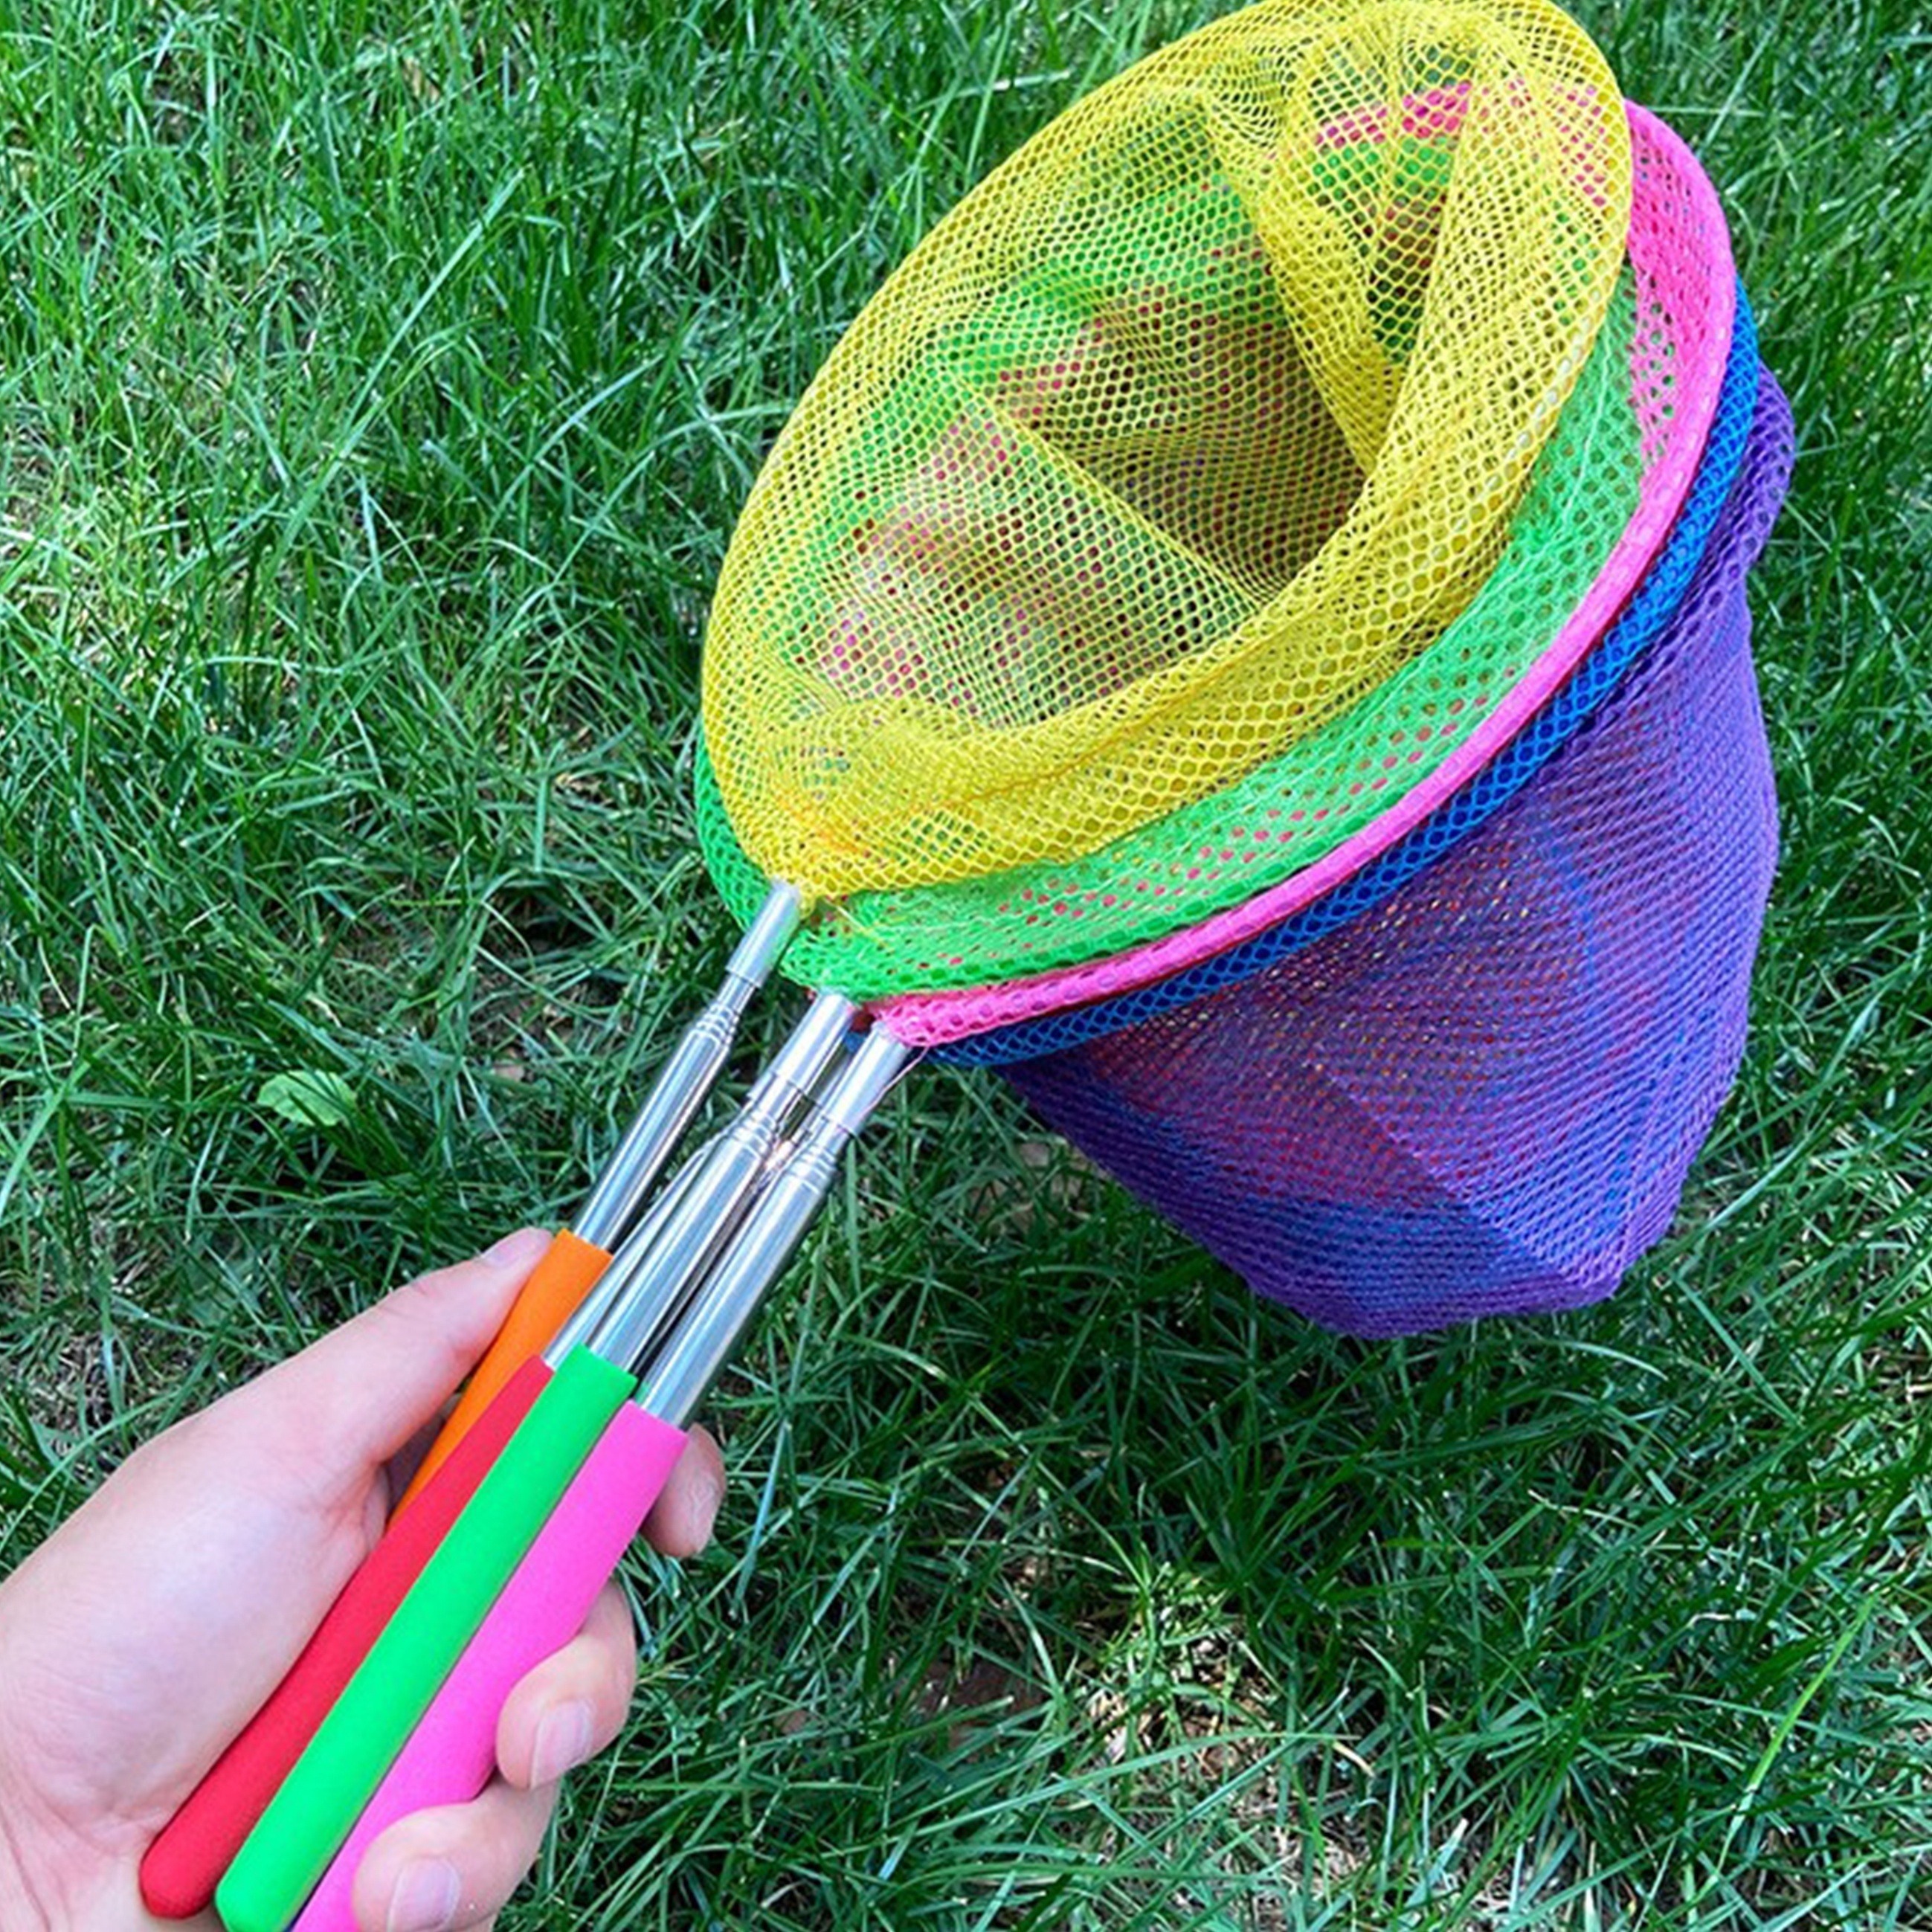 1 Extendable Kids Telescopic Butterfly Net Toy Catching Bugs